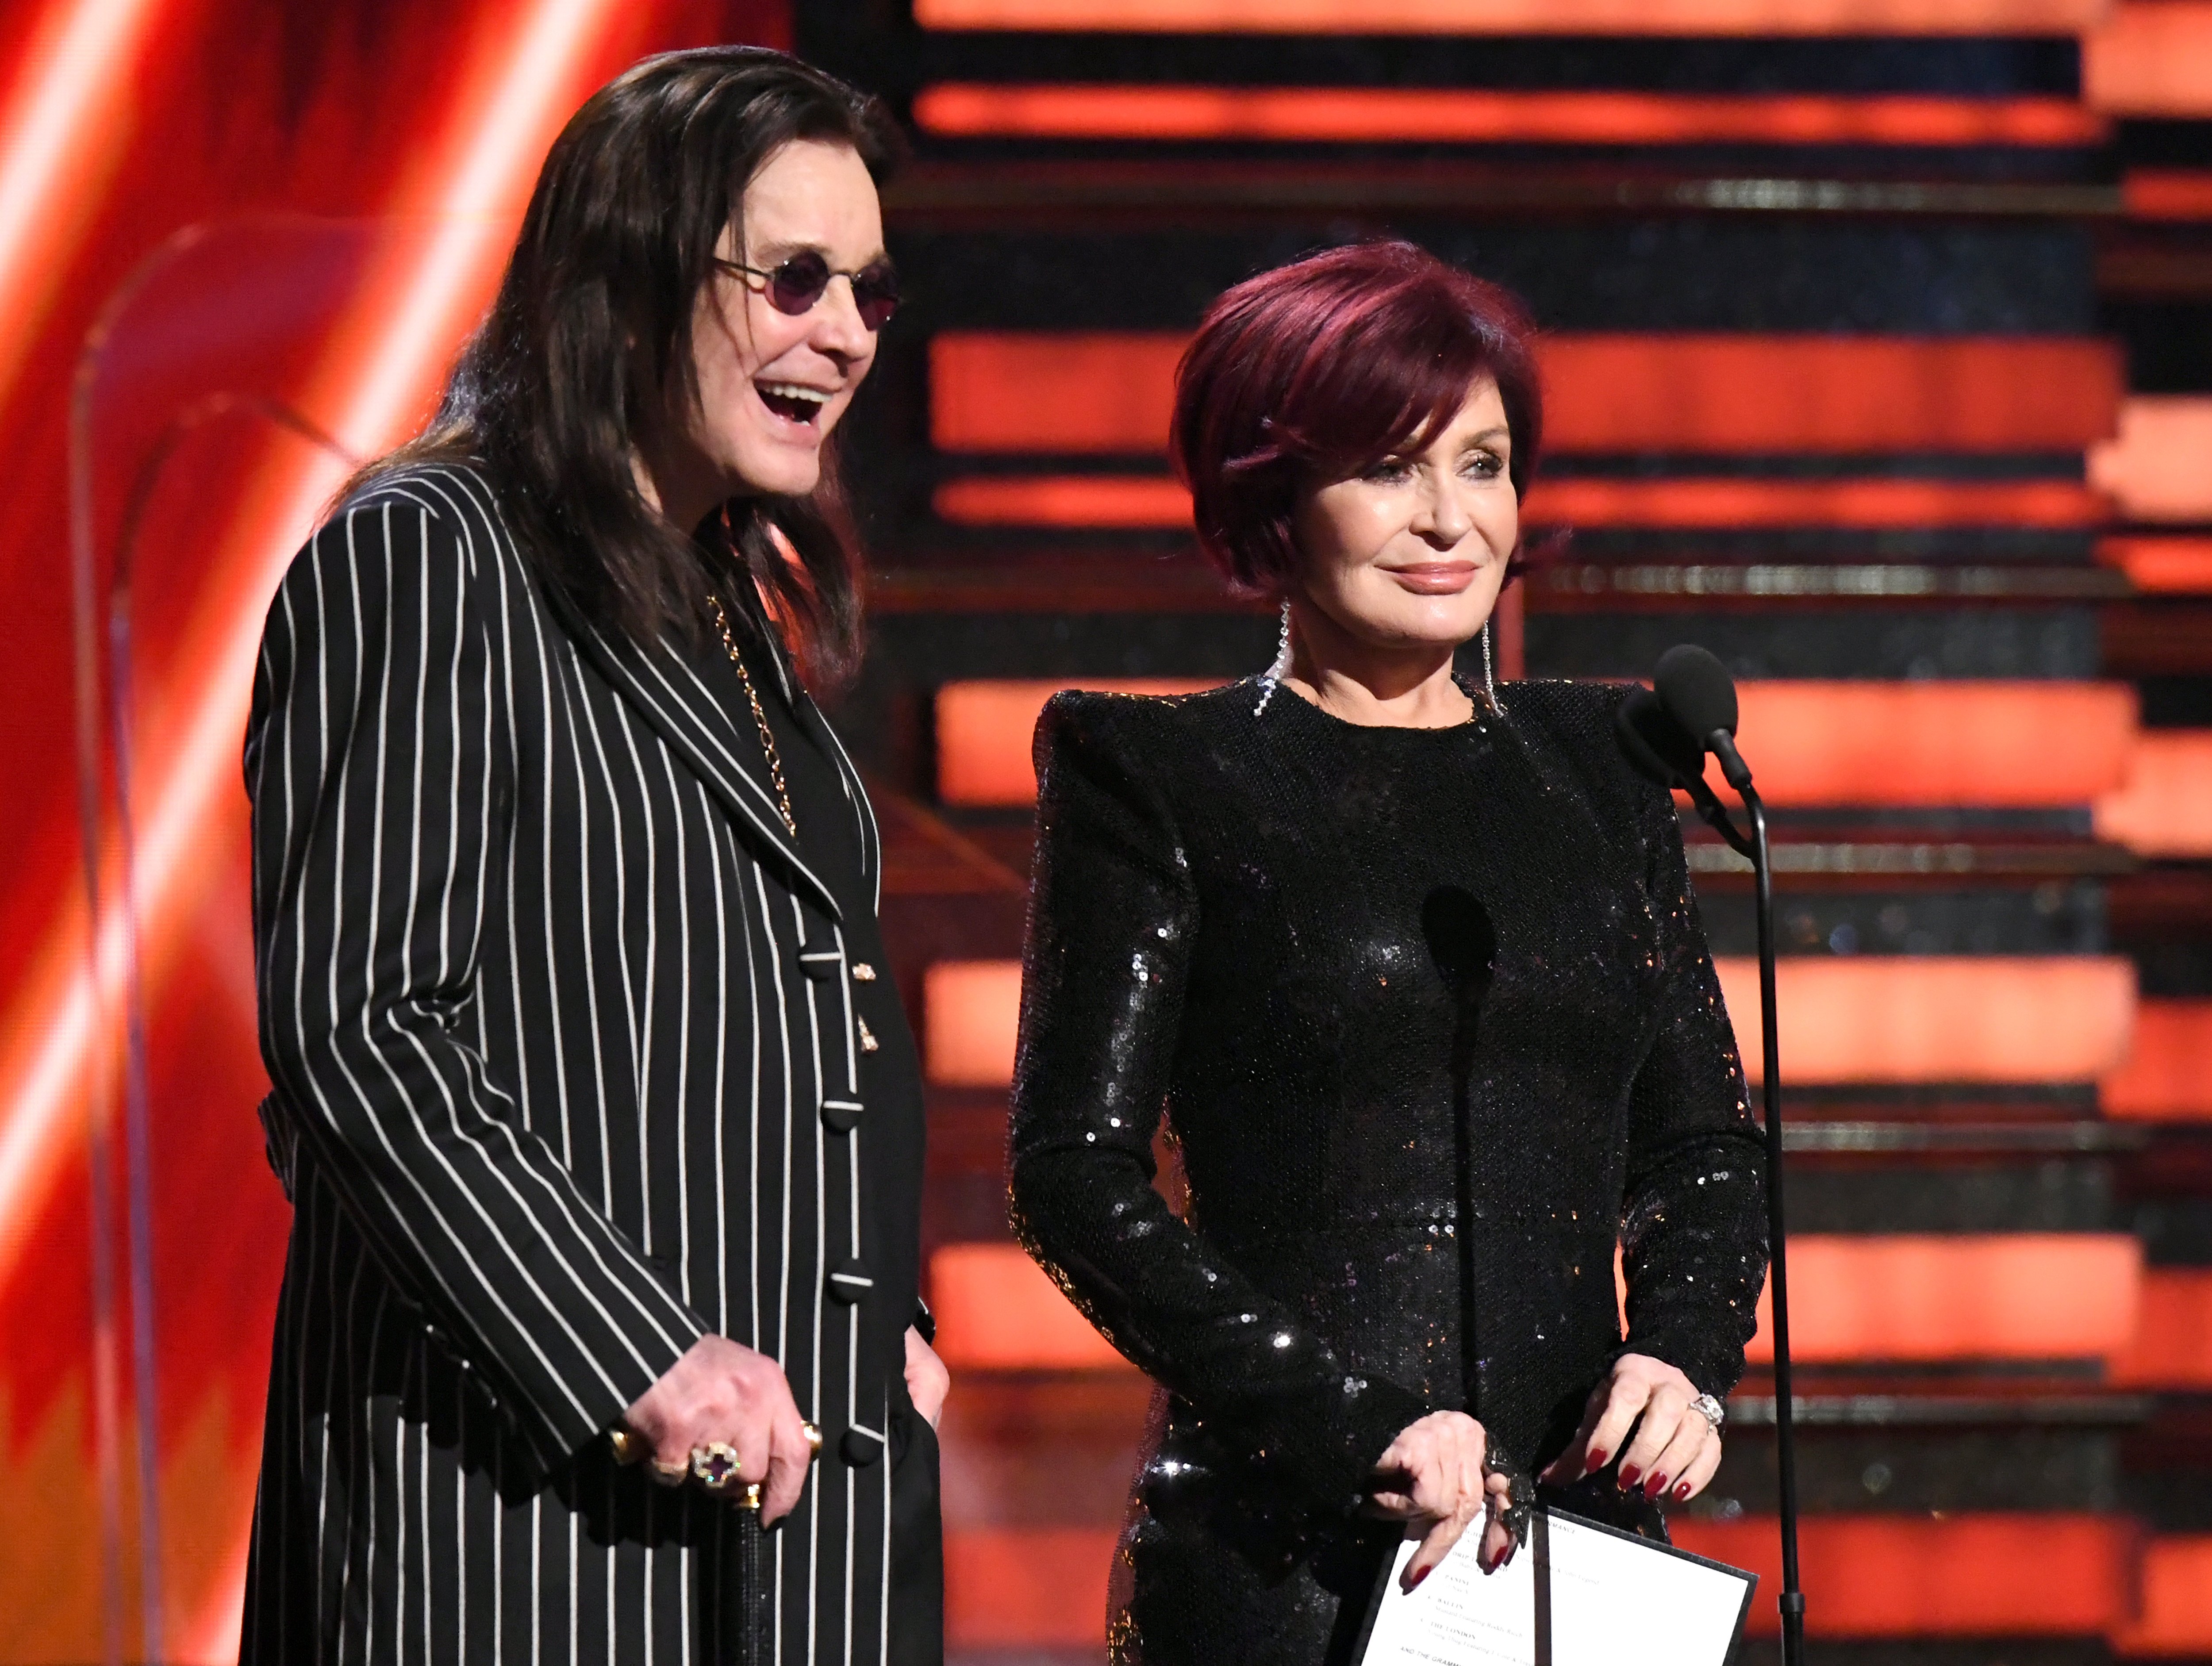 Ozzy Osbourne and Sharon Osbourne speak onstage during the 62nd Annual Grammy Awards at Staples Center on January 26, 2020 in Los Angeles, California | Photo: Getty Images